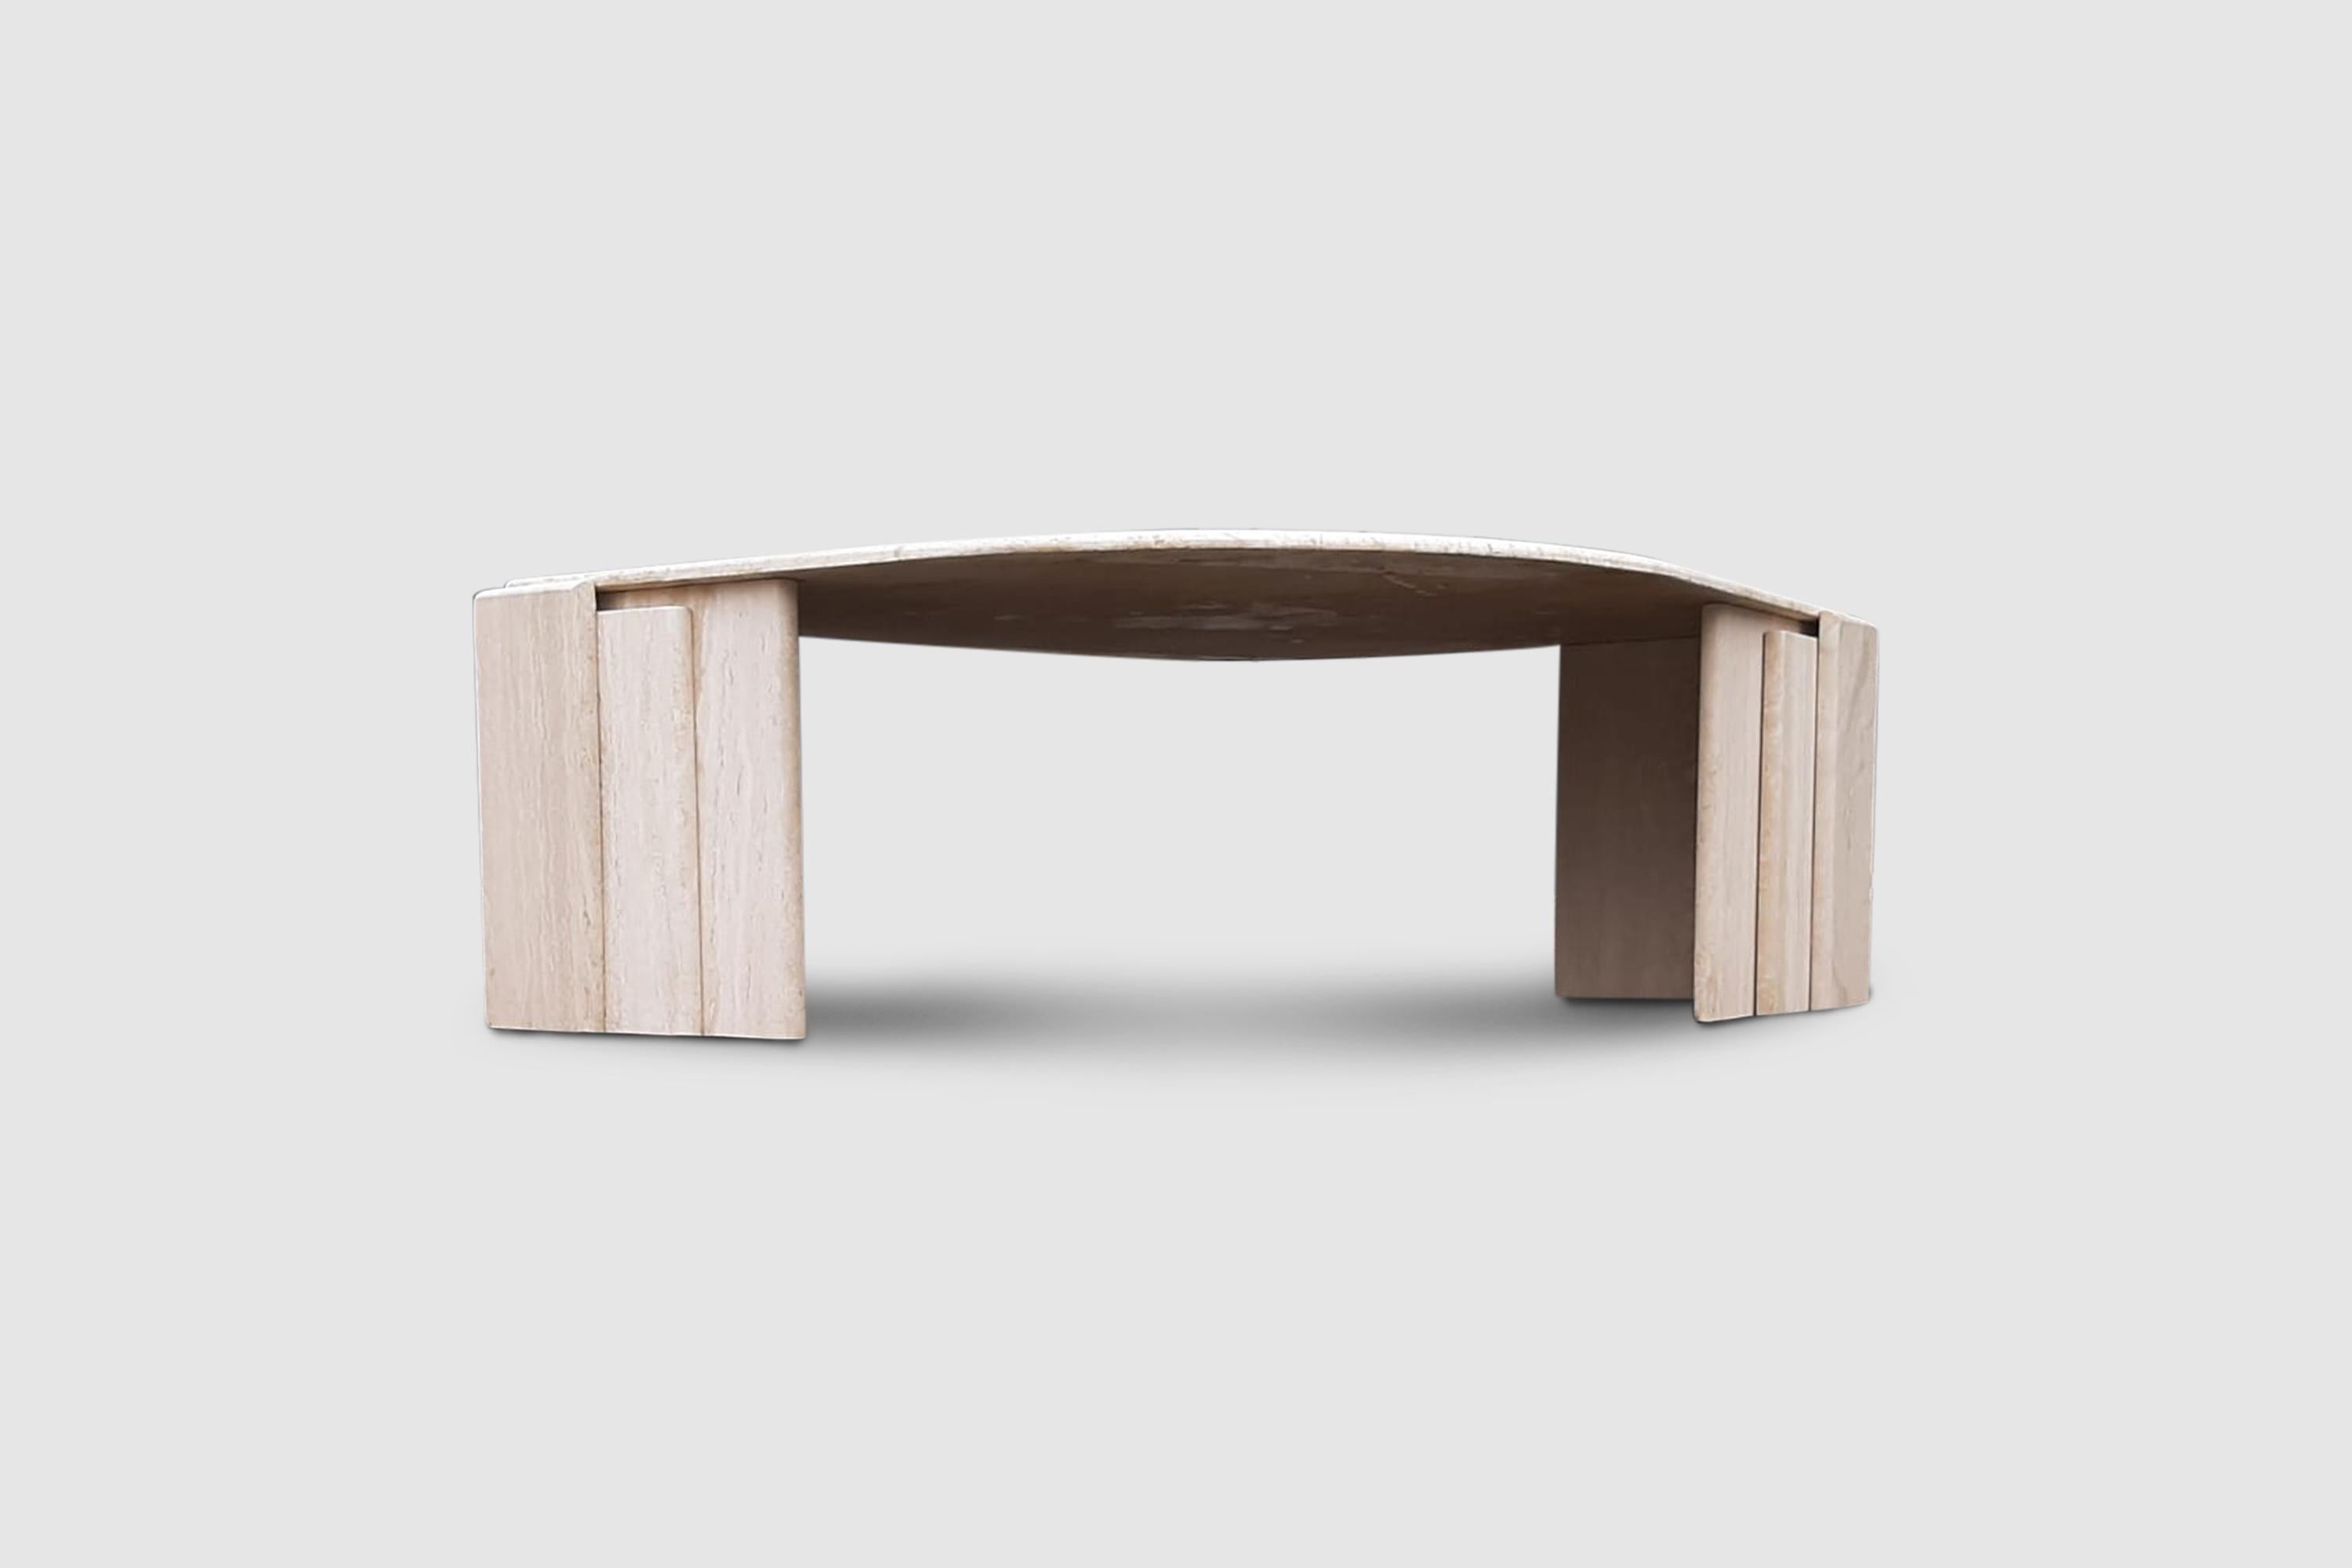 Sculptural travertine marble coffee table in tear shaped form. The table top is supported by 2 sculpted columns.

The marble is a beige travertine, with the natural patterns visible in the material.

The table is very sober in its design but the